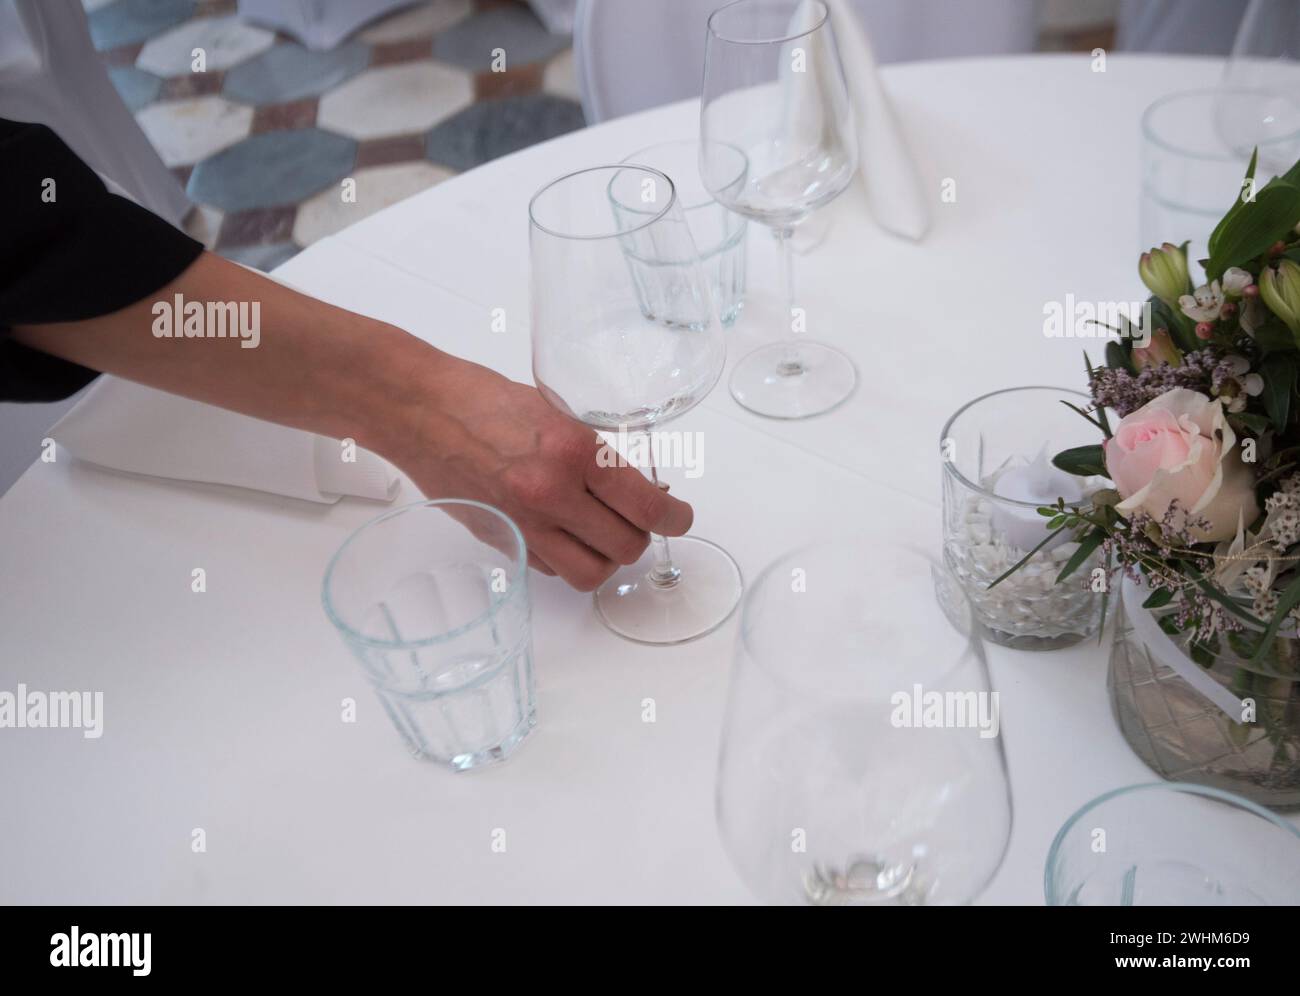 The table setting in gastronomy Stock Photo